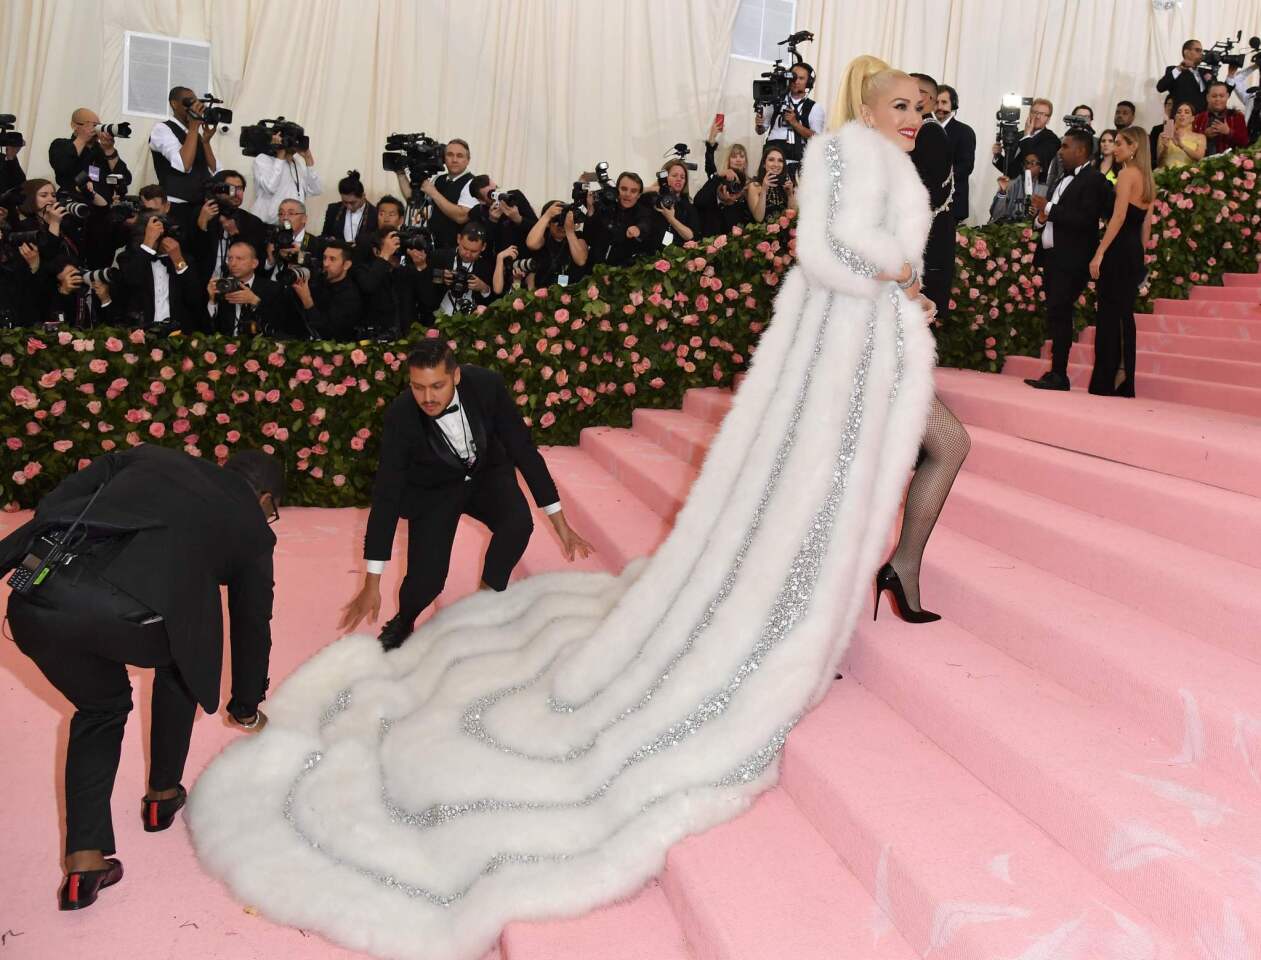 US singer-songwriter Gwen Stefani arrives for the 2019 Met Gala at the Metropolitan Museum of Art on May 6, 2019, in New York. - The Gala raises money for the Metropolitan Museum of Arts Costume Institute. The Gala's 2019 theme is Camp: Notes on Fashion" inspired by Susan Sontag's 1964 essay "Notes on Camp". (Photo by ANGELA WEISS / AFP)ANGELA WEISS/AFP/Getty Images ** OUTS - ELSENT, FPG, CM - OUTS * NM, PH, VA if sourced by CT, LA or MoD **